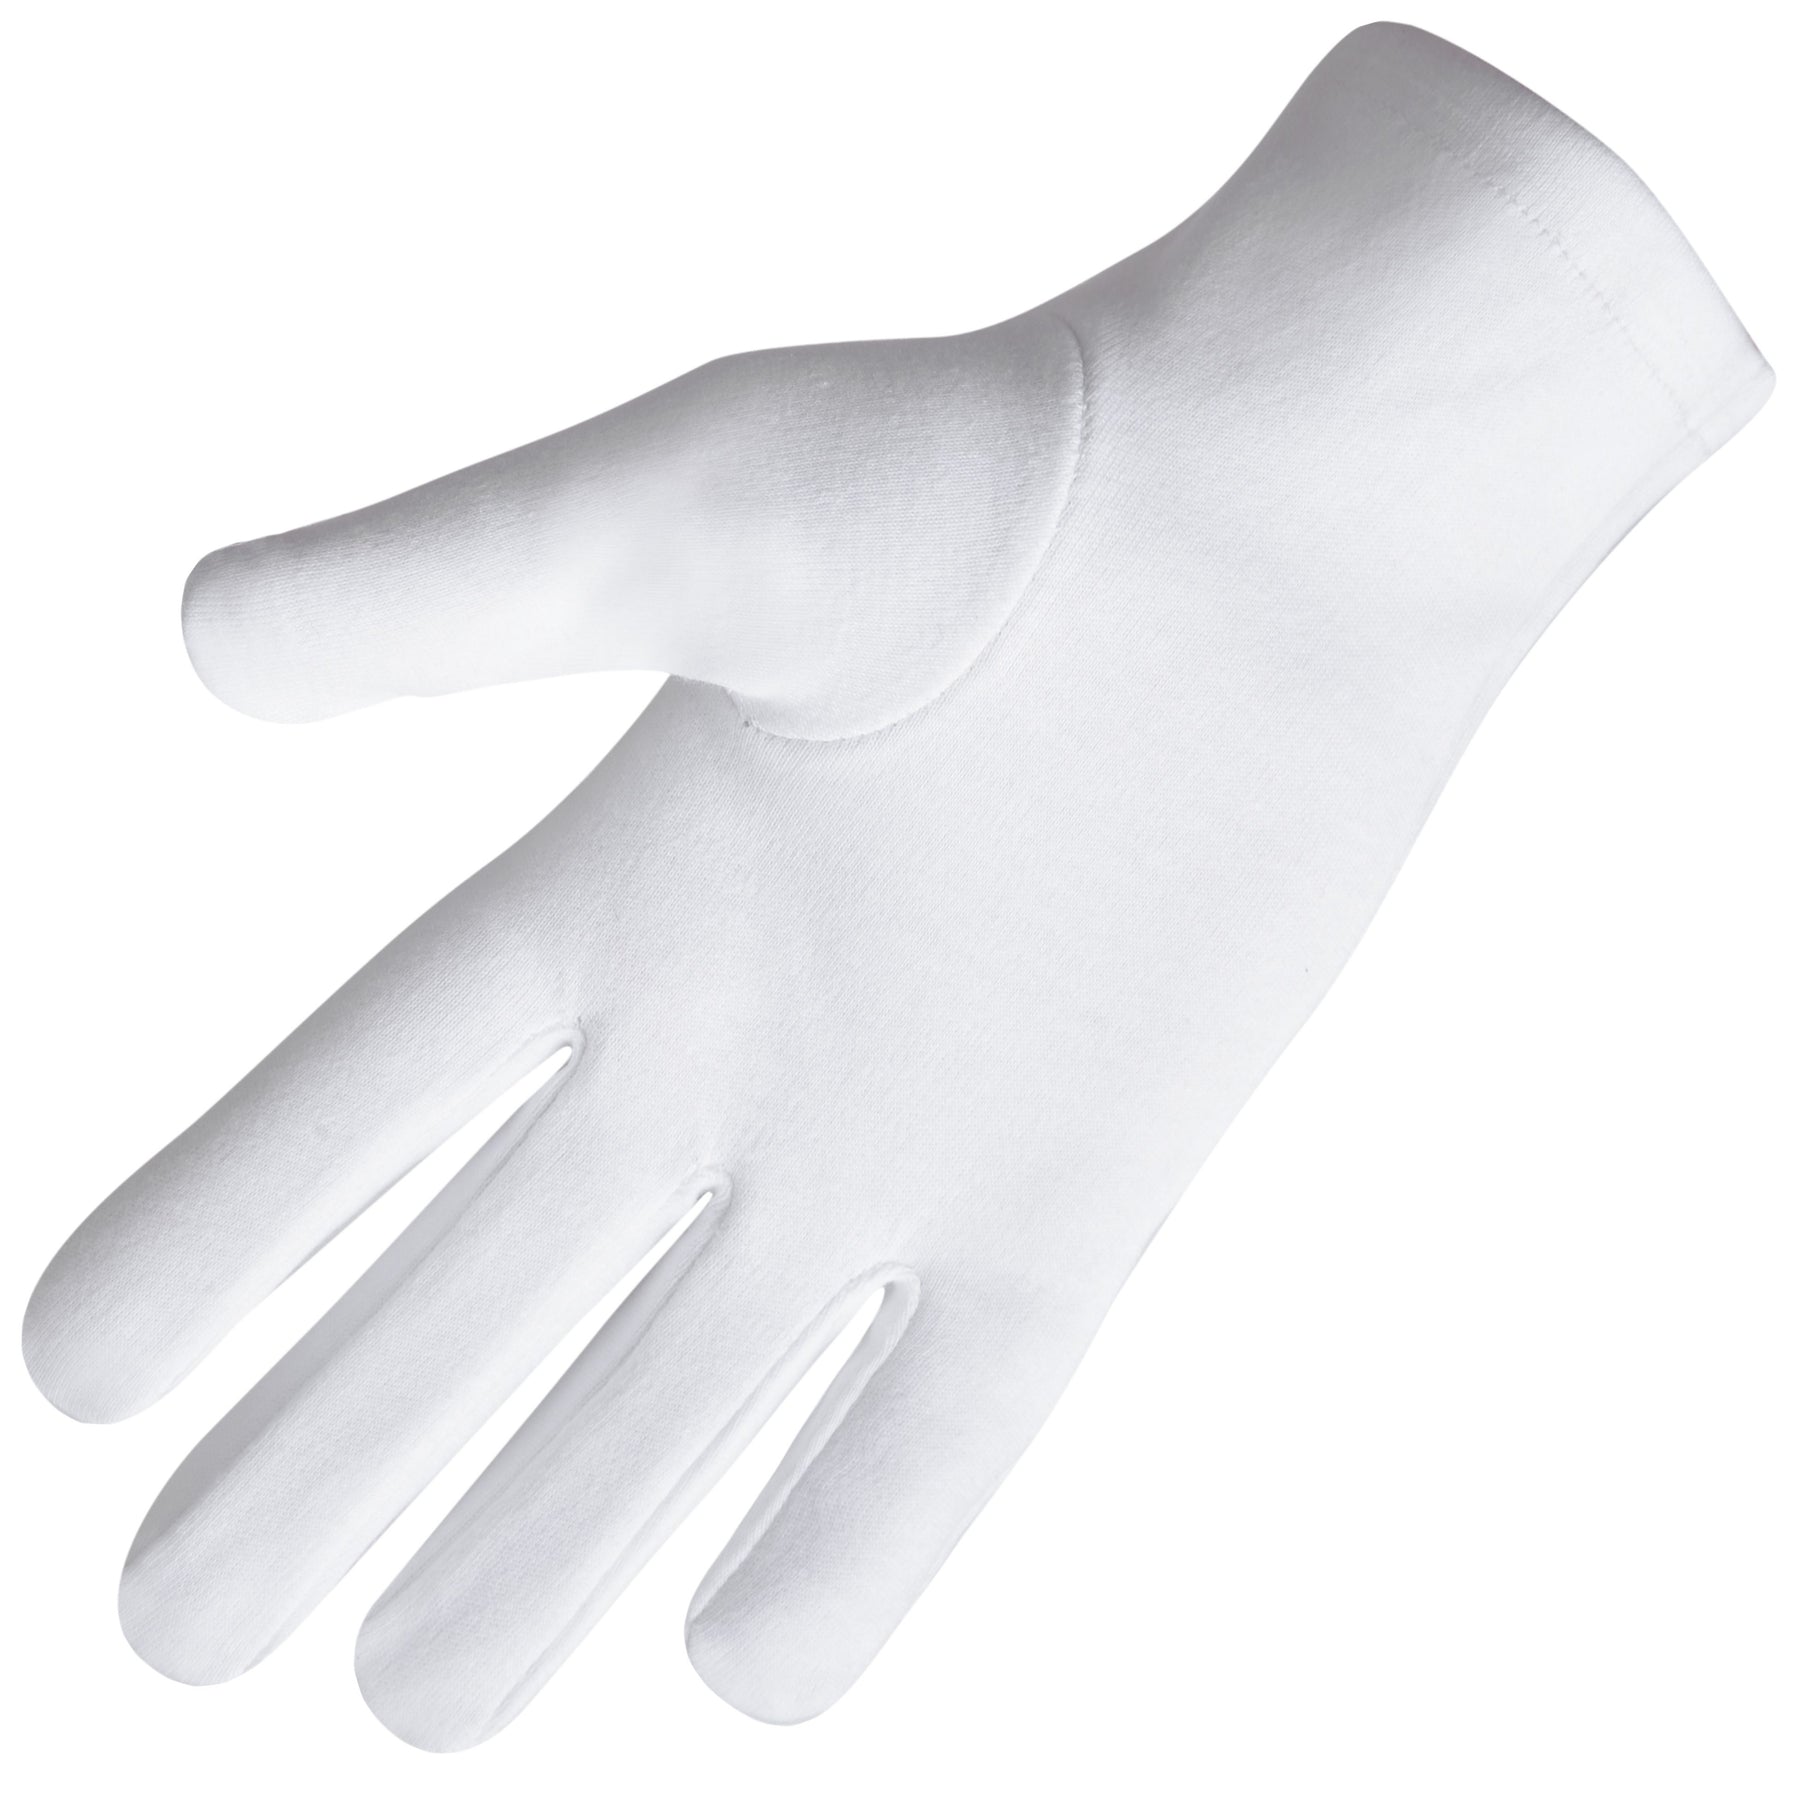 The Order Of The Golden Circle PHA Glove - White Cotton With Gold Emblem - Bricks Masons